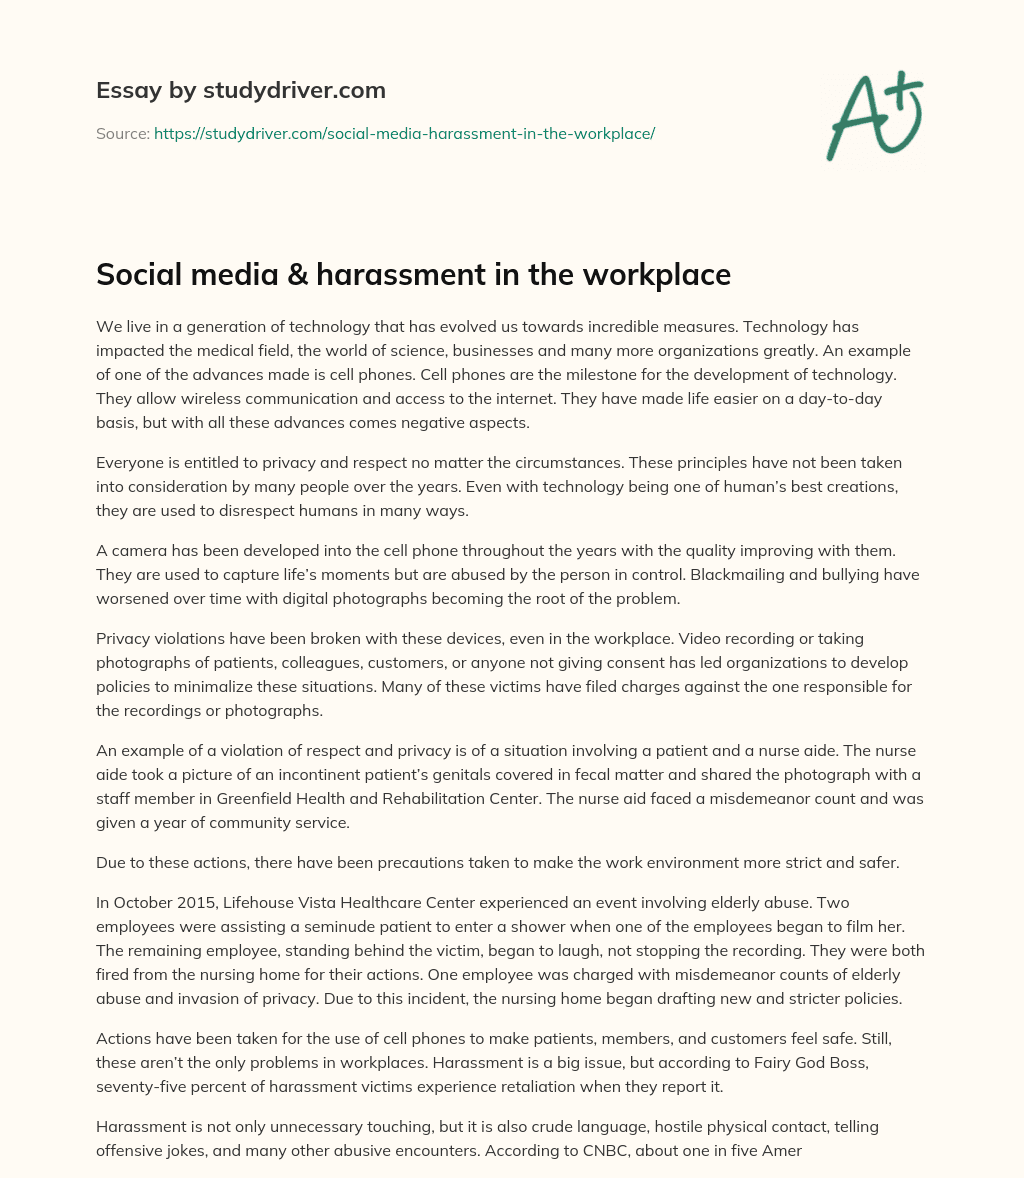 Social Media & Harassment in the Workplace essay